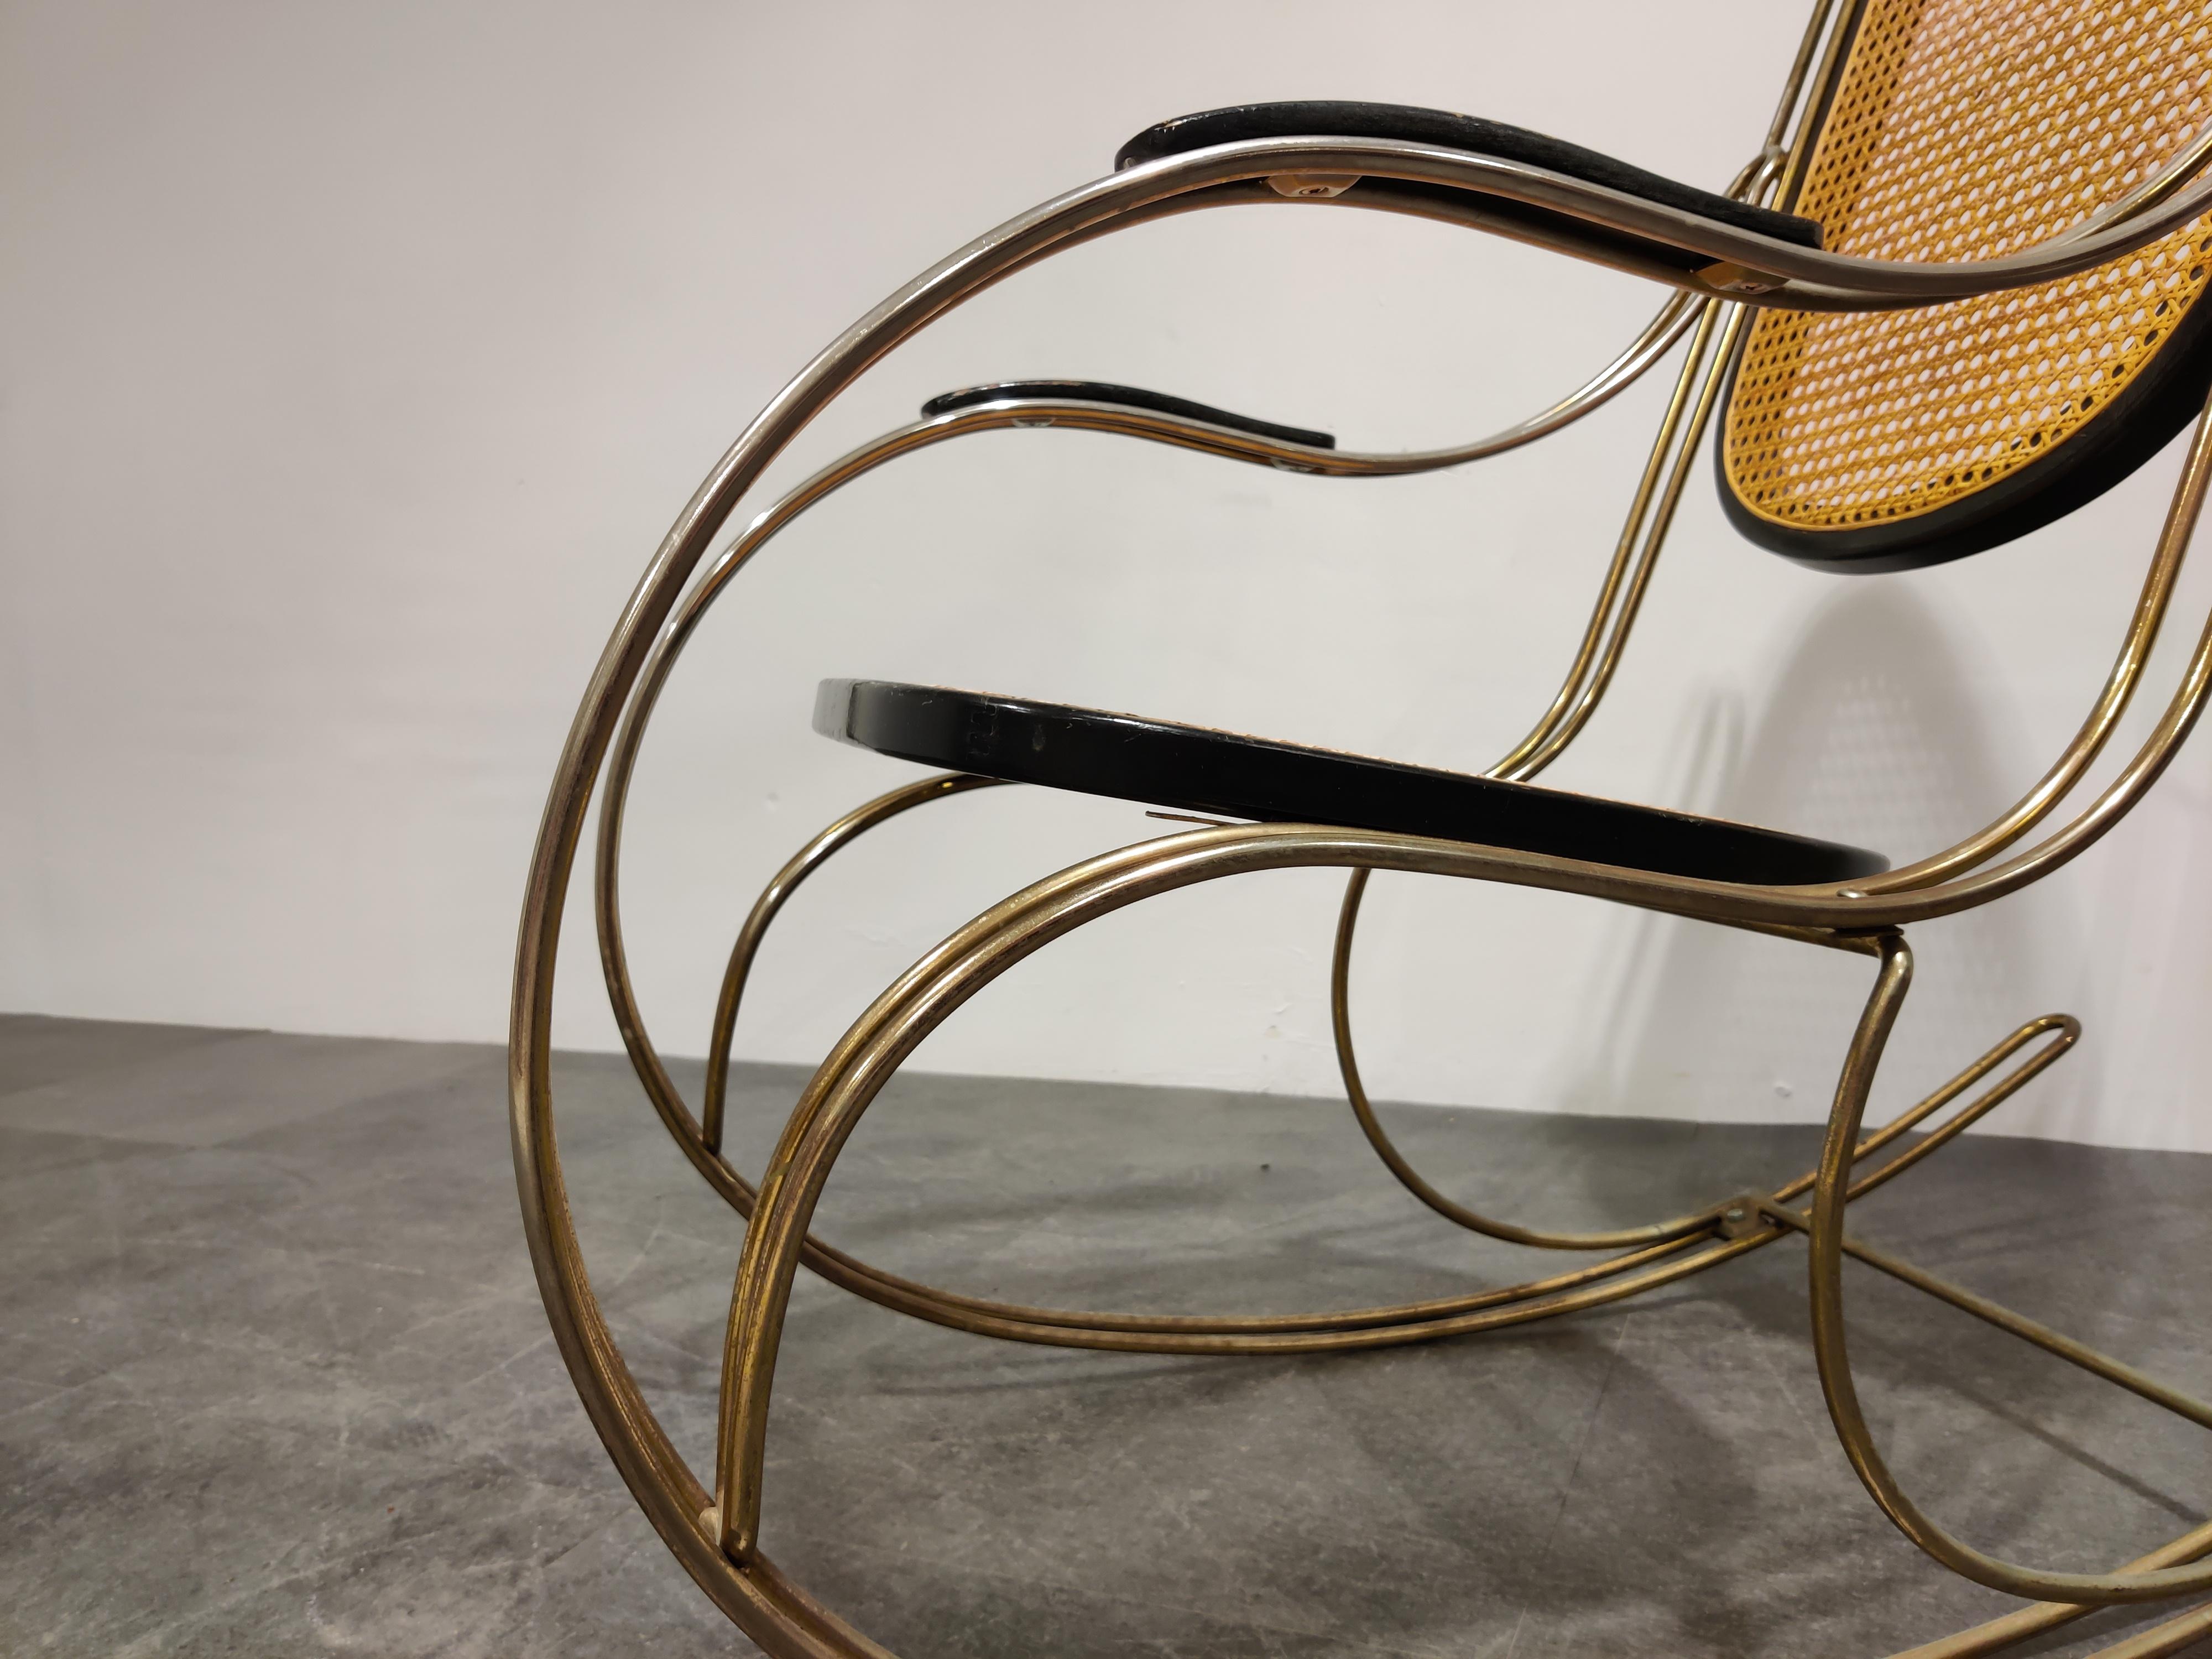 Midcentury rocking chair made from chromed metal, rattan woven seats and backrest and lacquered wood.

This timeless piece has just the right amount of patina and looks beautiful in any interior.

Good condition,

1960s, Italy

Measures: